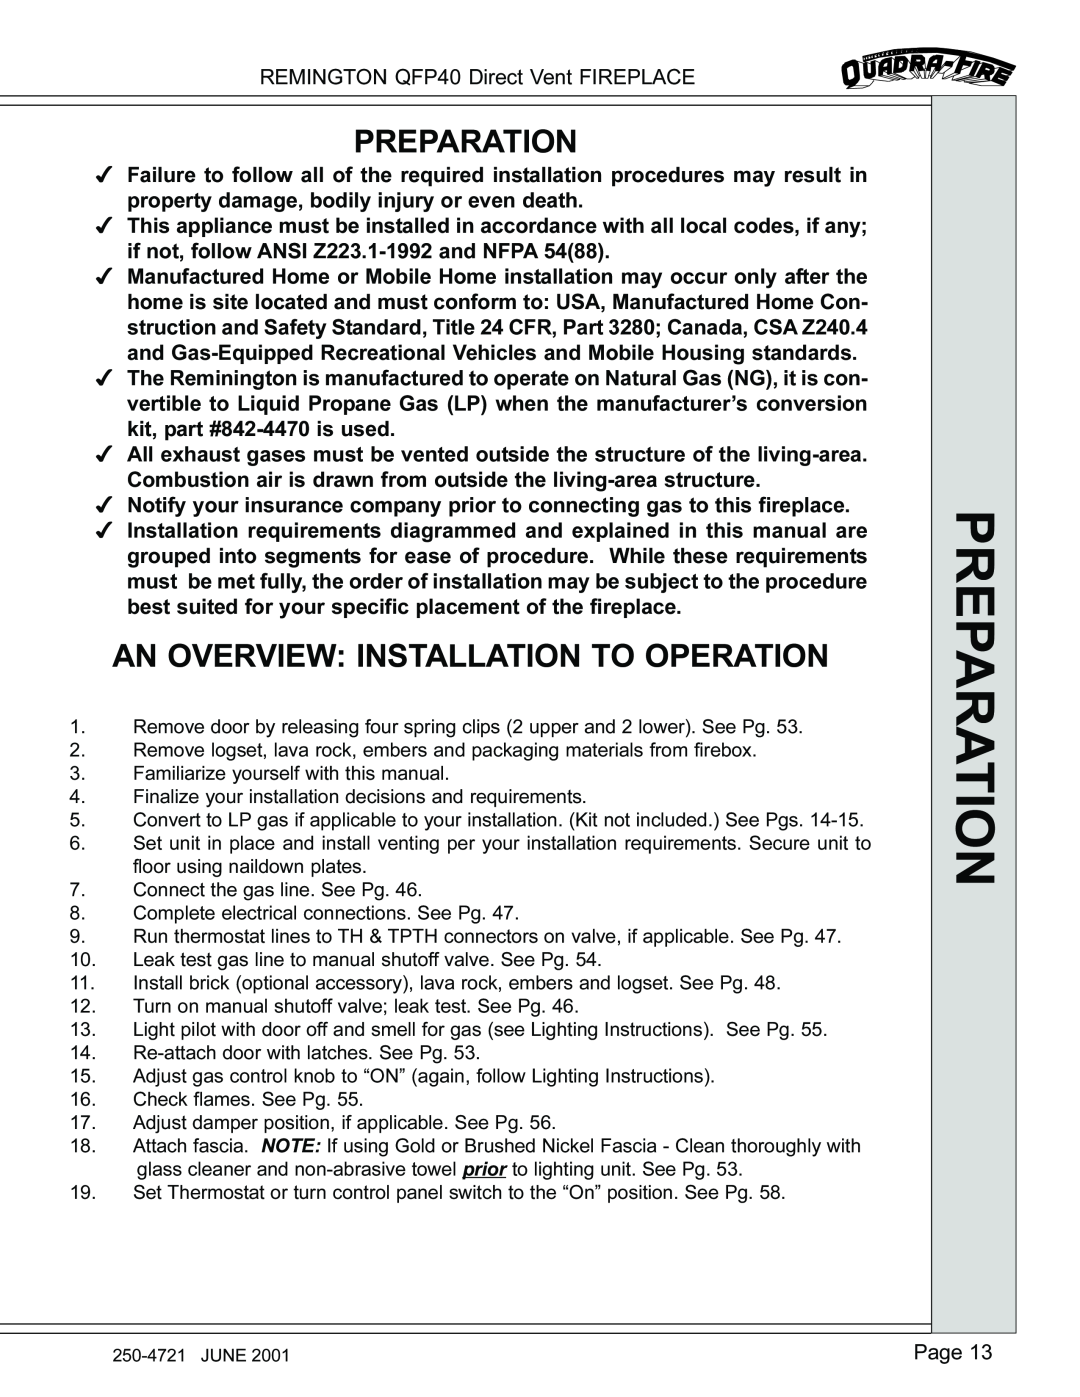 Remington QFP40 manual Preparation, An Overview Installation To Operation 